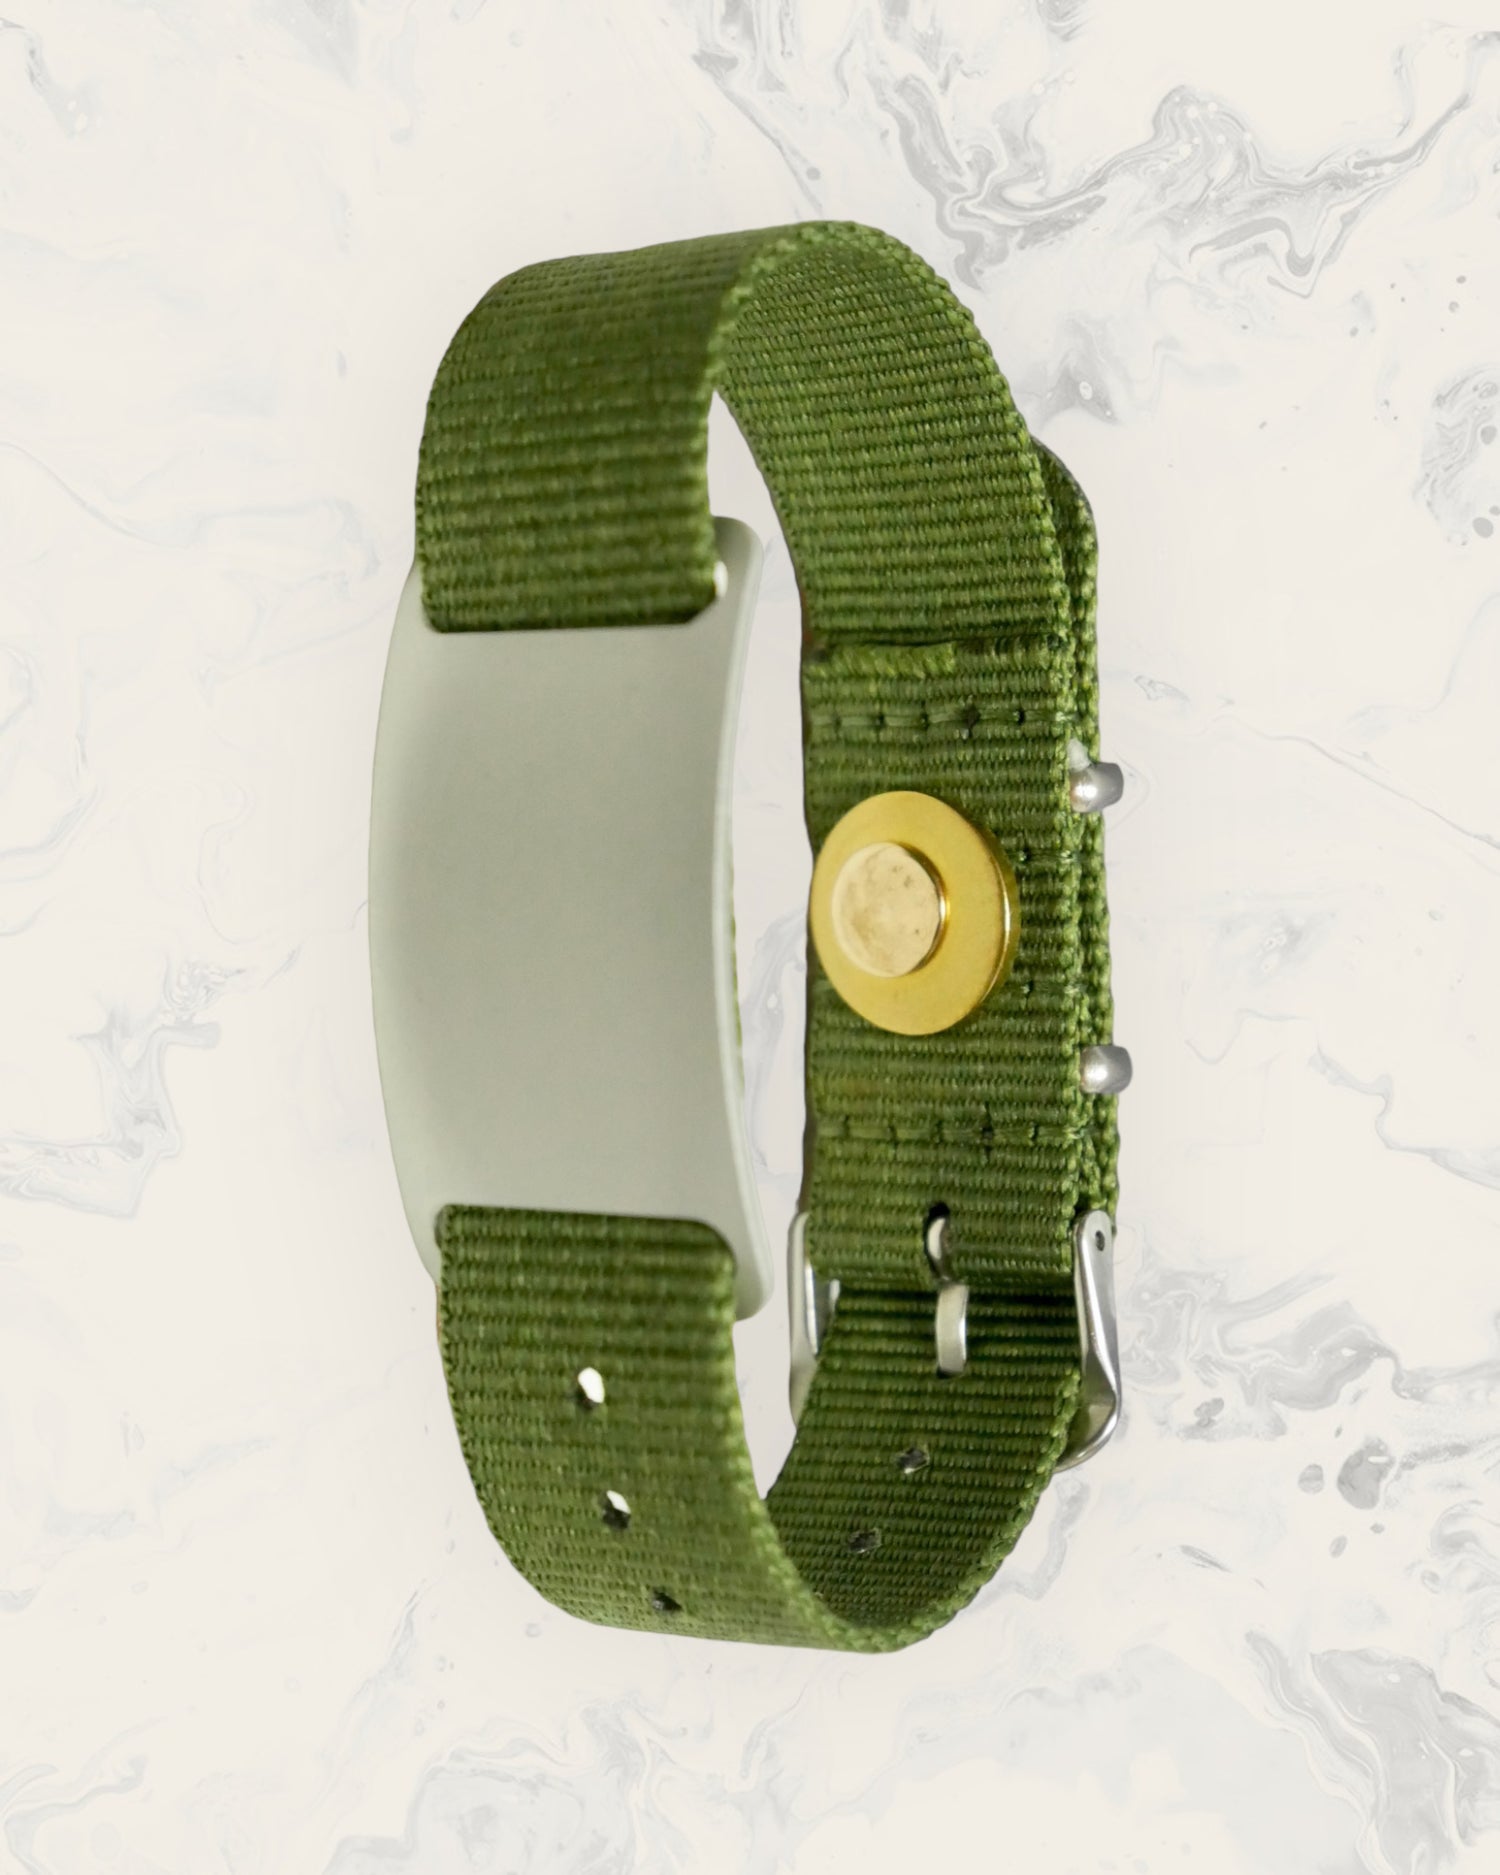 Natural Pain Relief and EMF Protection Bracelet Nylon Band Color Army Green with a Silver Slider